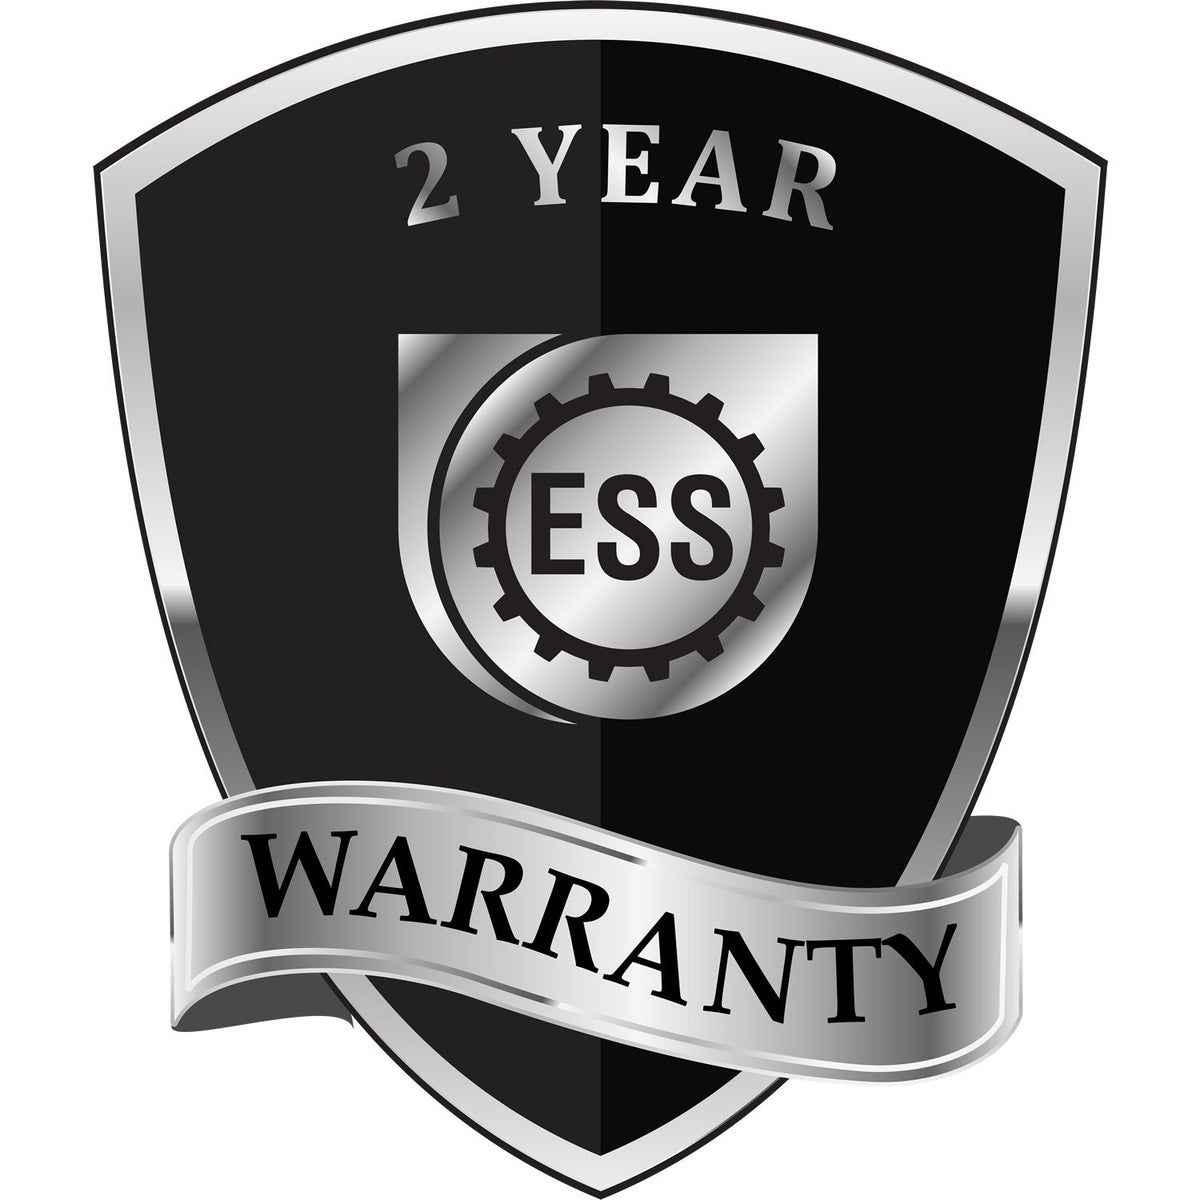 A badge or emblem showing a warranty icon for the Long Reach Kentucky PE Seal